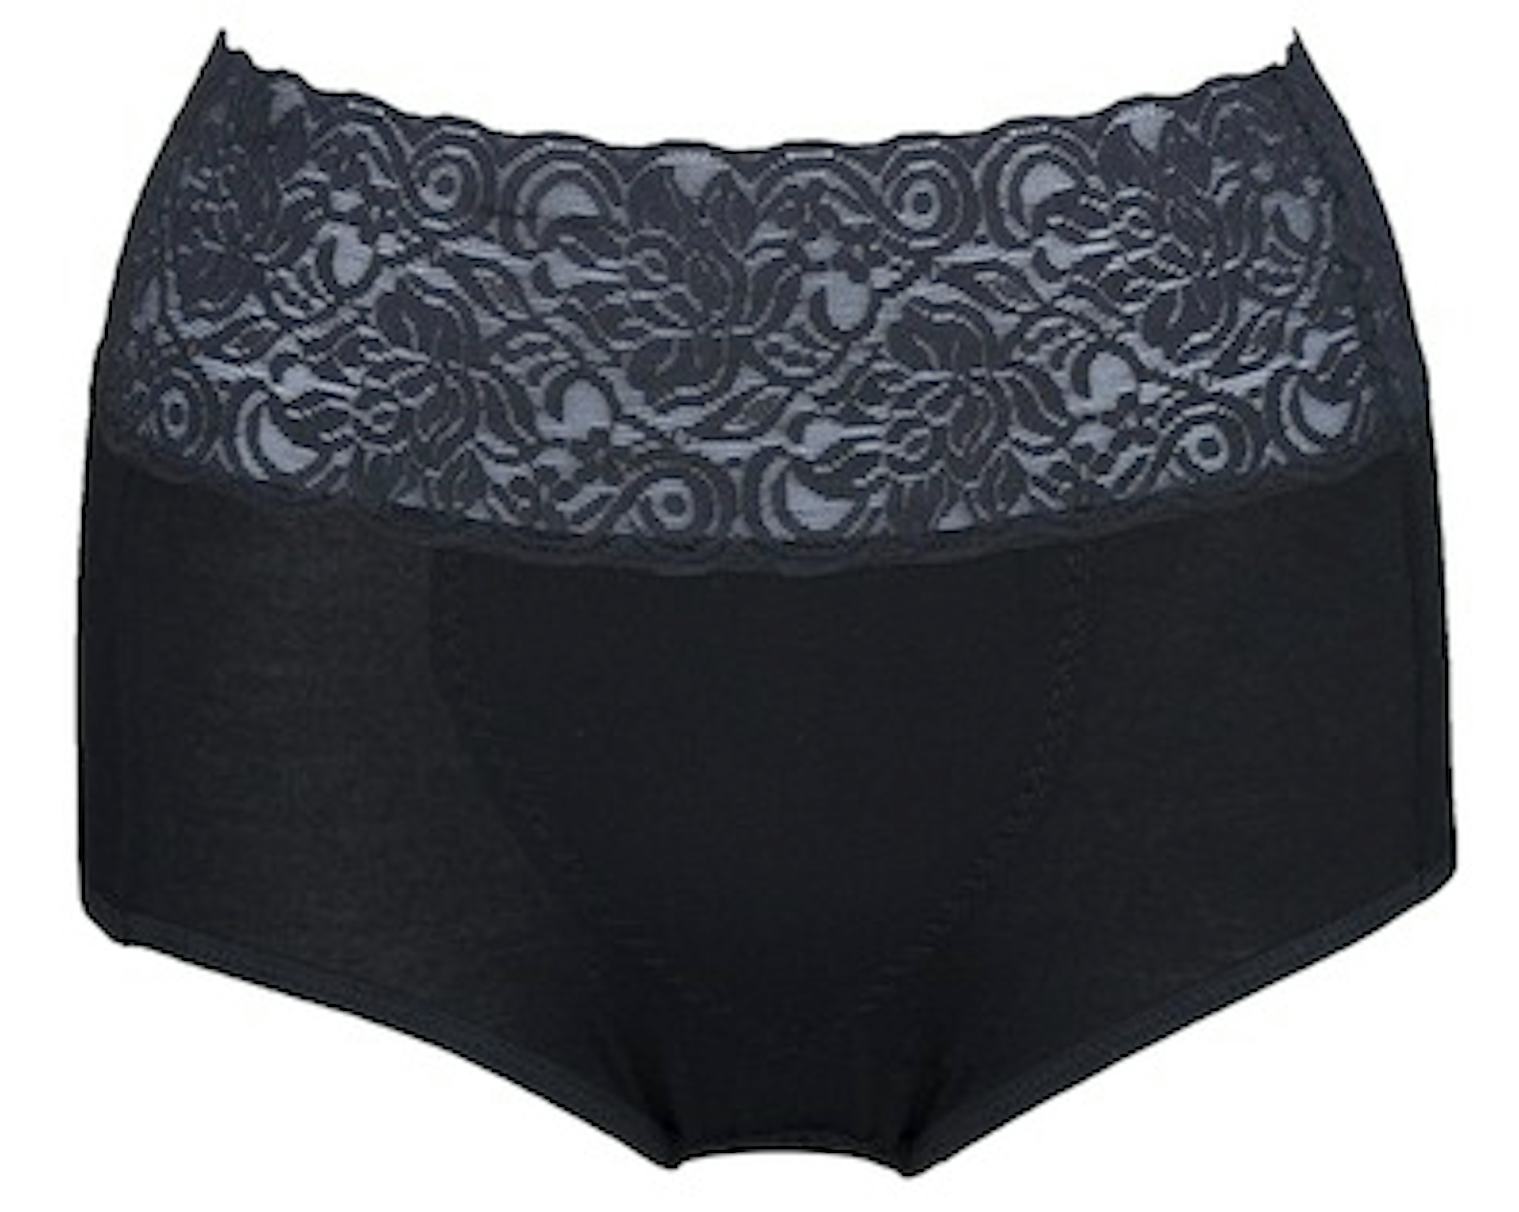 9 Cute Period Undies That Actually Hold Up & Look Awesome